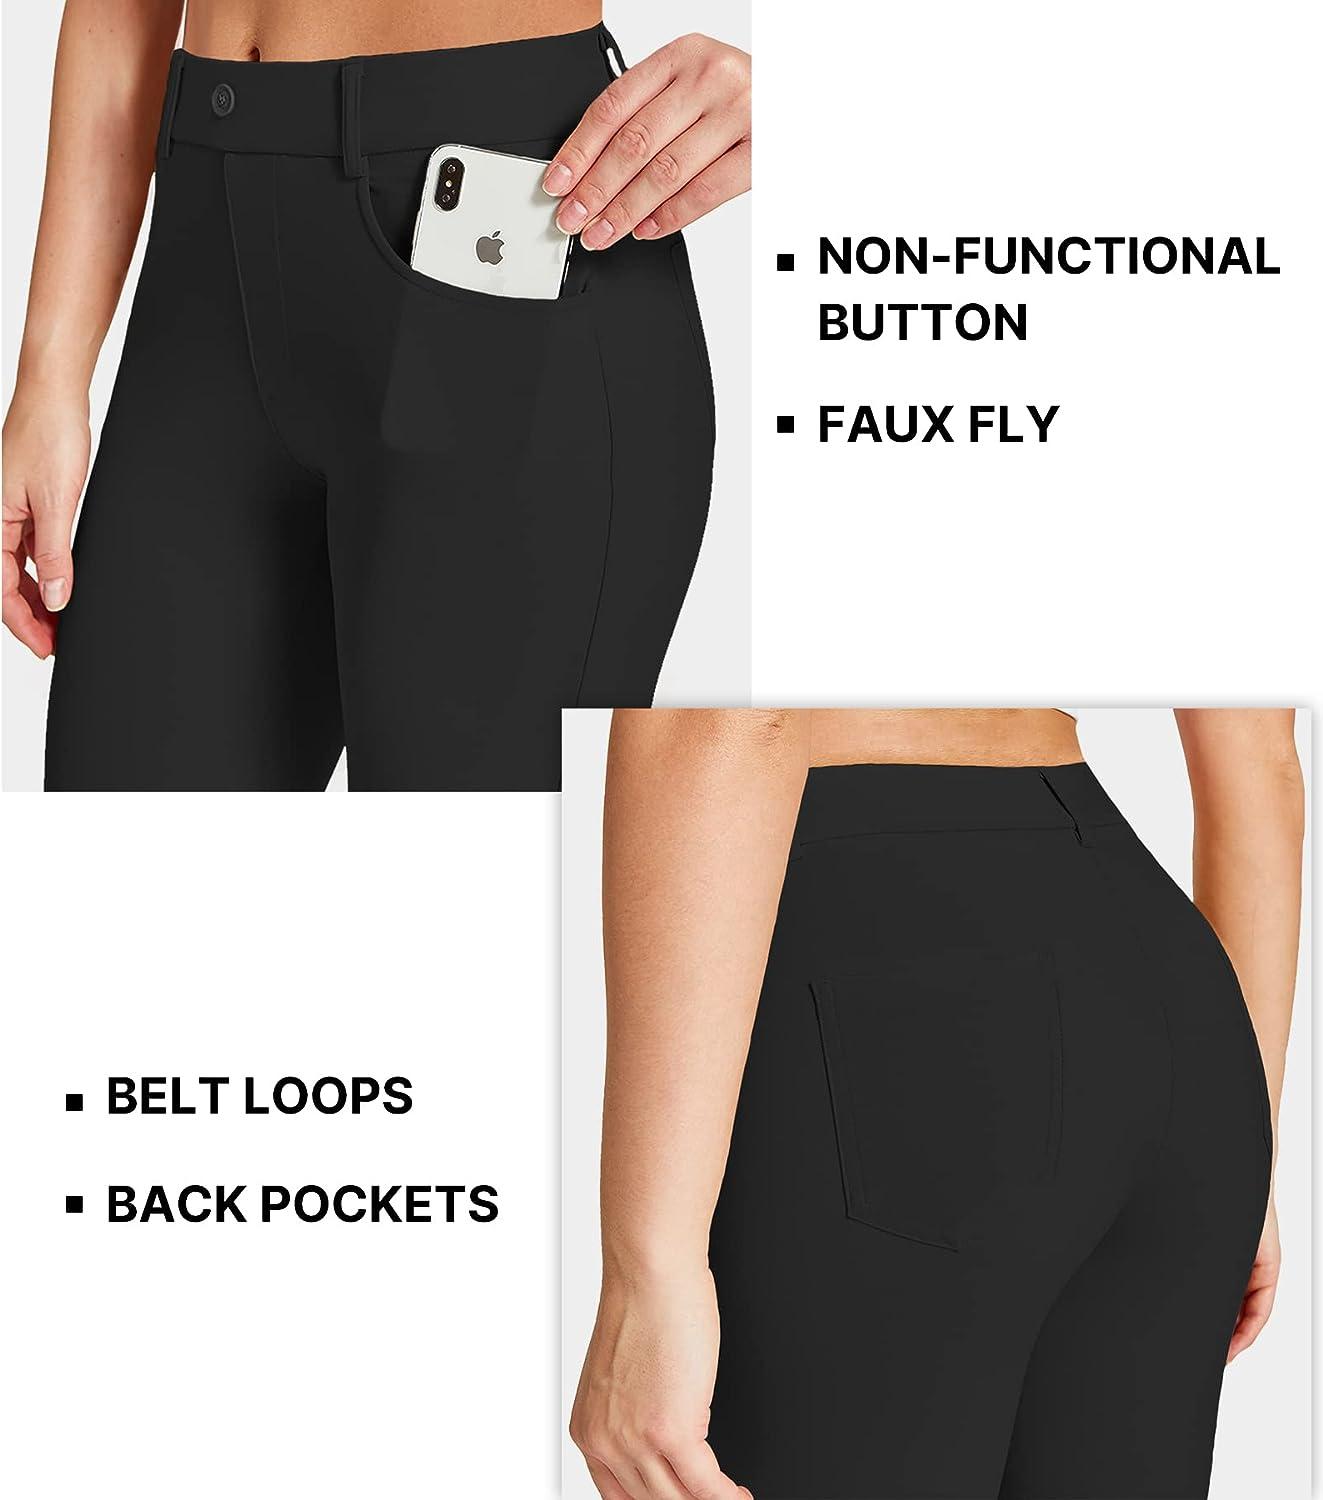 High Waist Work Pants for Women Casual Classic Boot Leg Pants Office Lady  Stretch Pants with Pockets